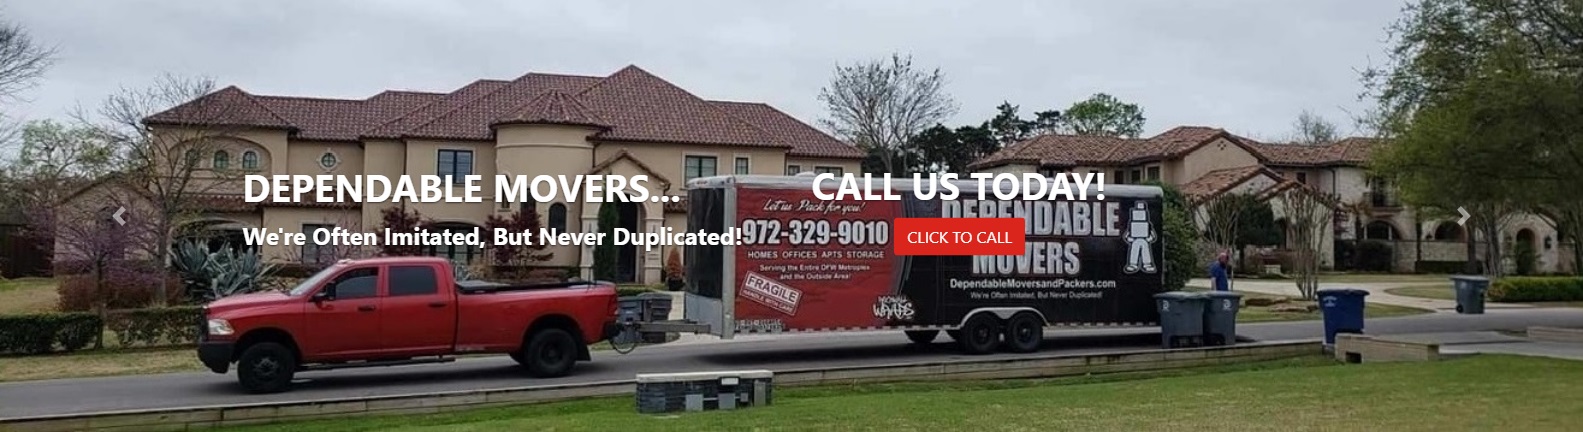 Dependable Movers Dallas Mover Dallas Moving Company - Home Office Apartment Movers Residential Commercial Movers in Dallas Texas